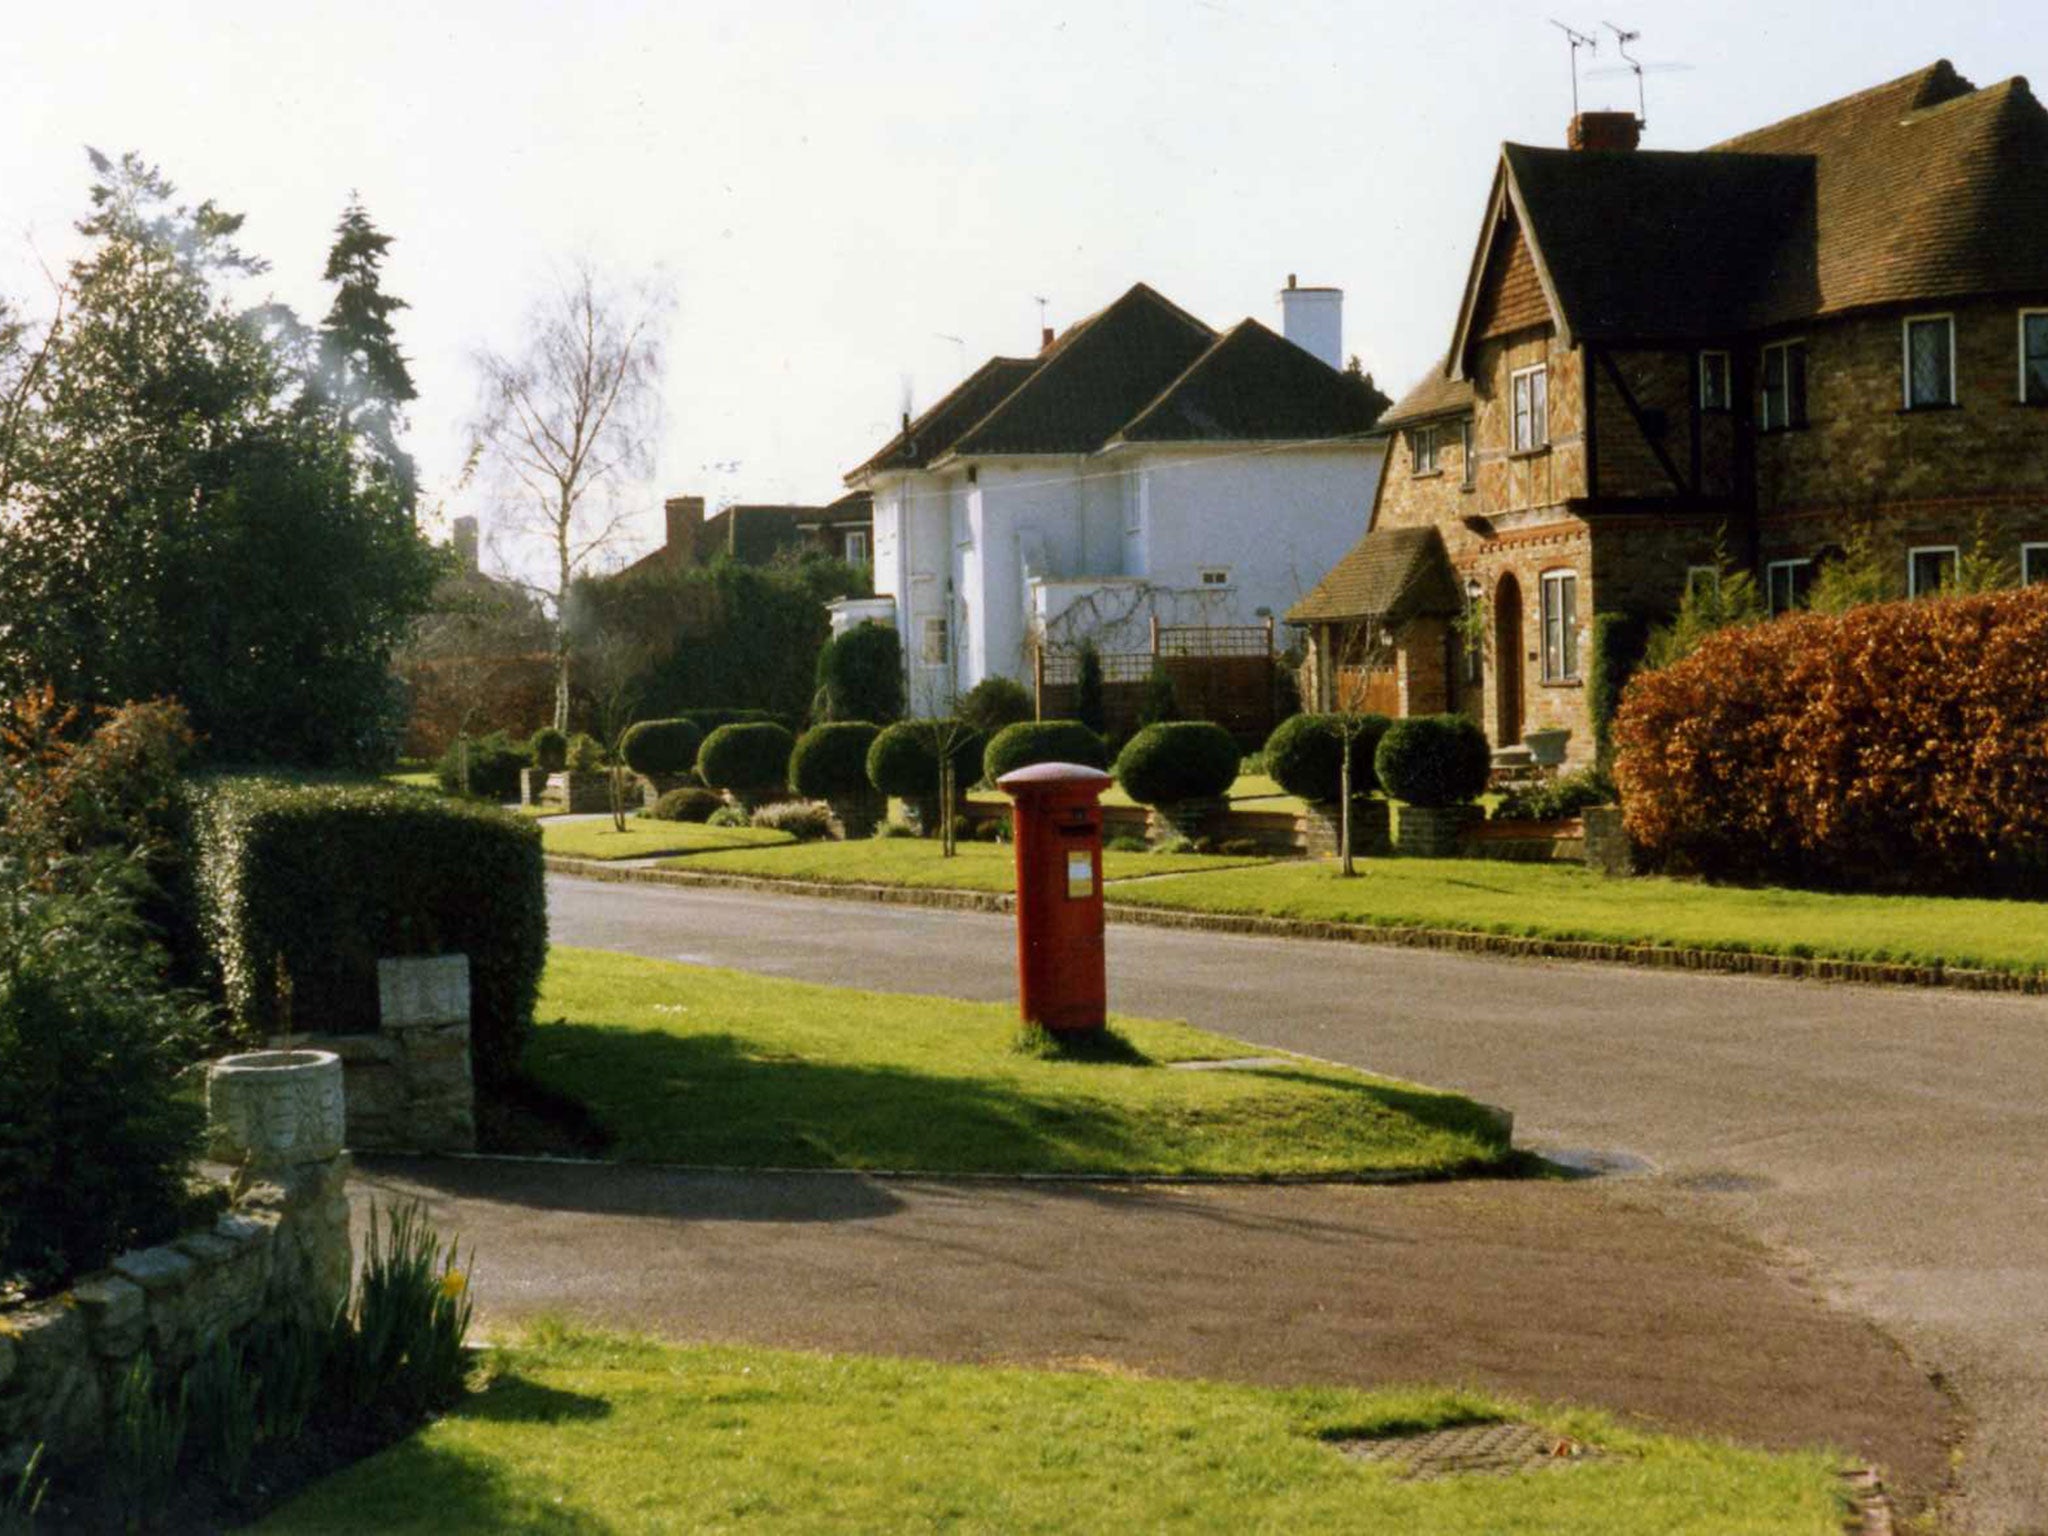 Esher, in Surrey, which recorded the fastest rise in house prices